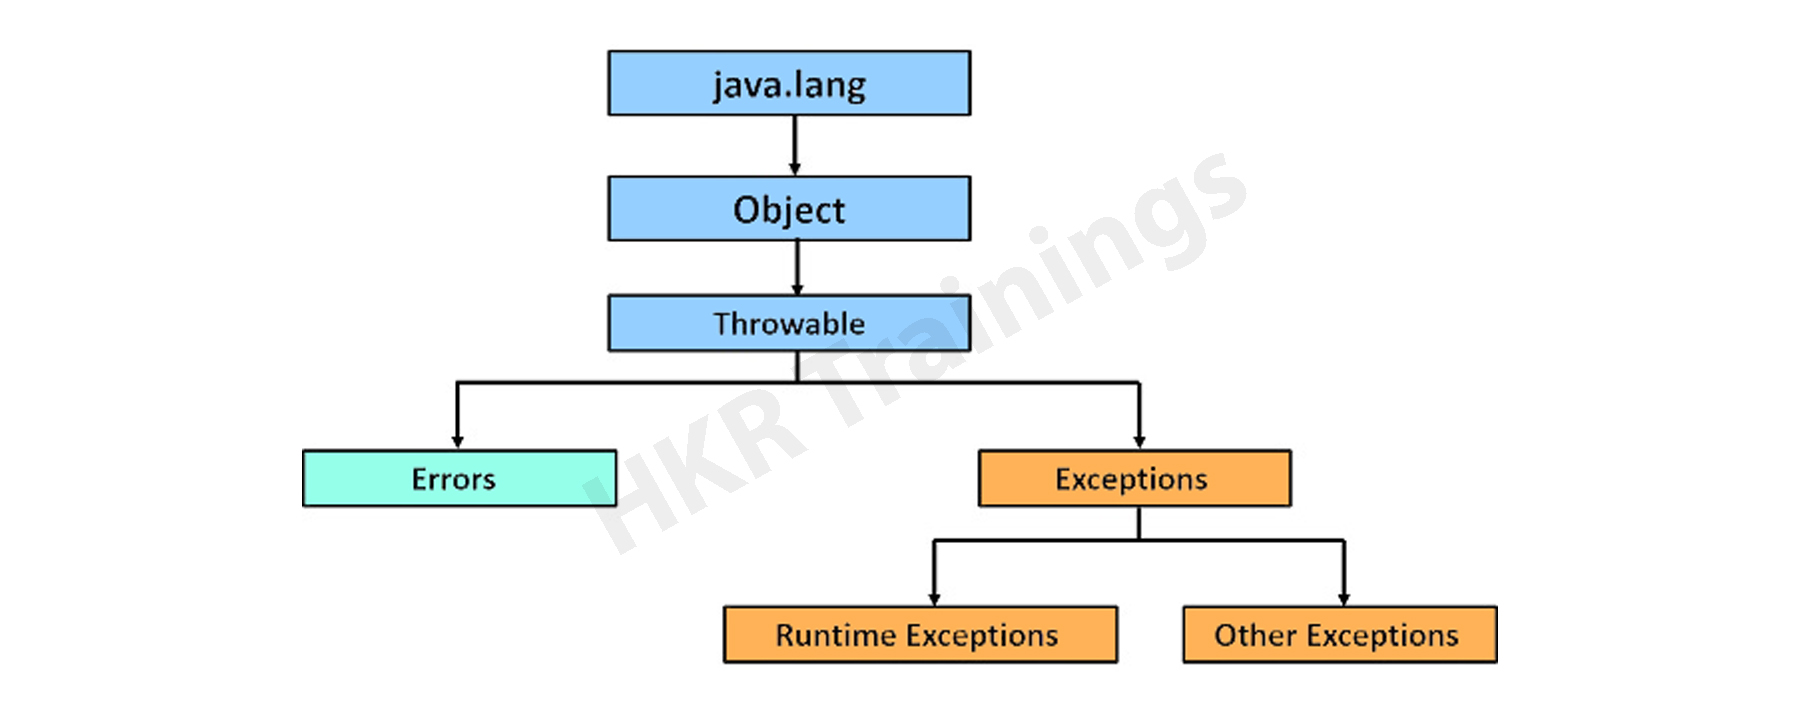 Exception Class Hierarchy